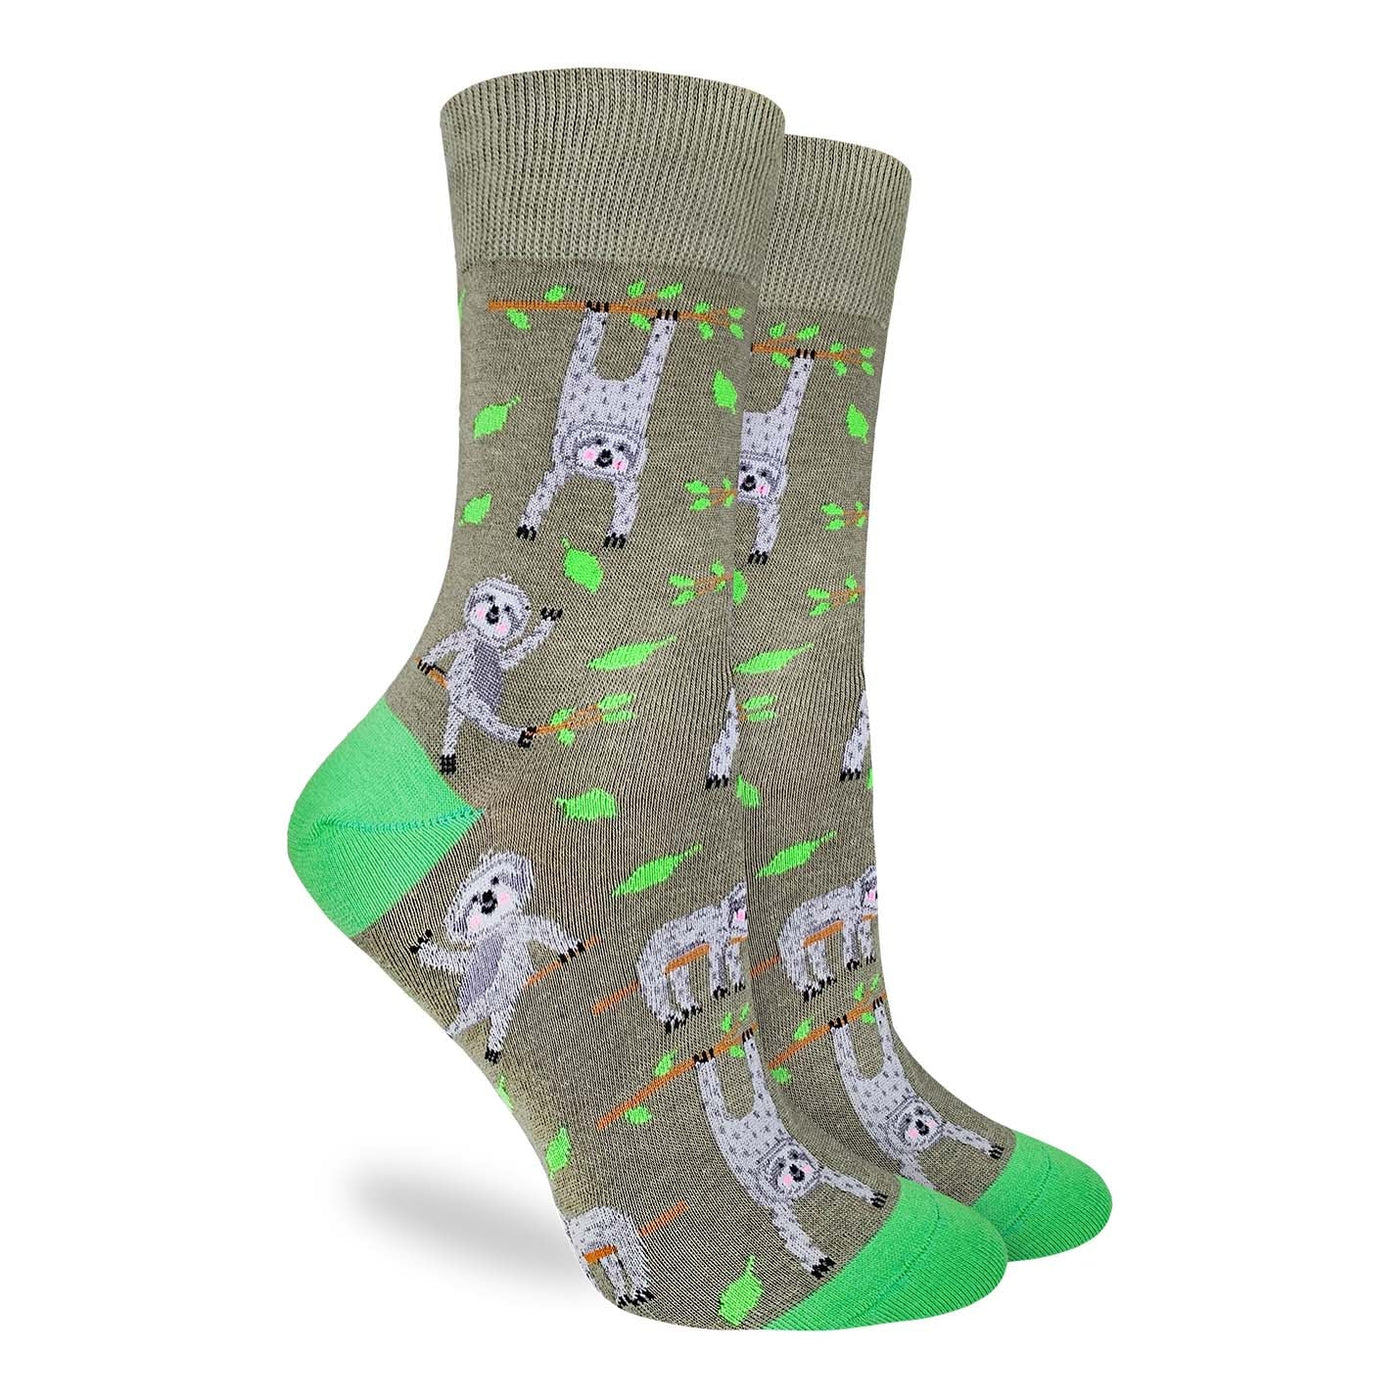 "Sloths Hanging Out" Cotton Crew Socks by Good Luck Sock - Medium - SALE